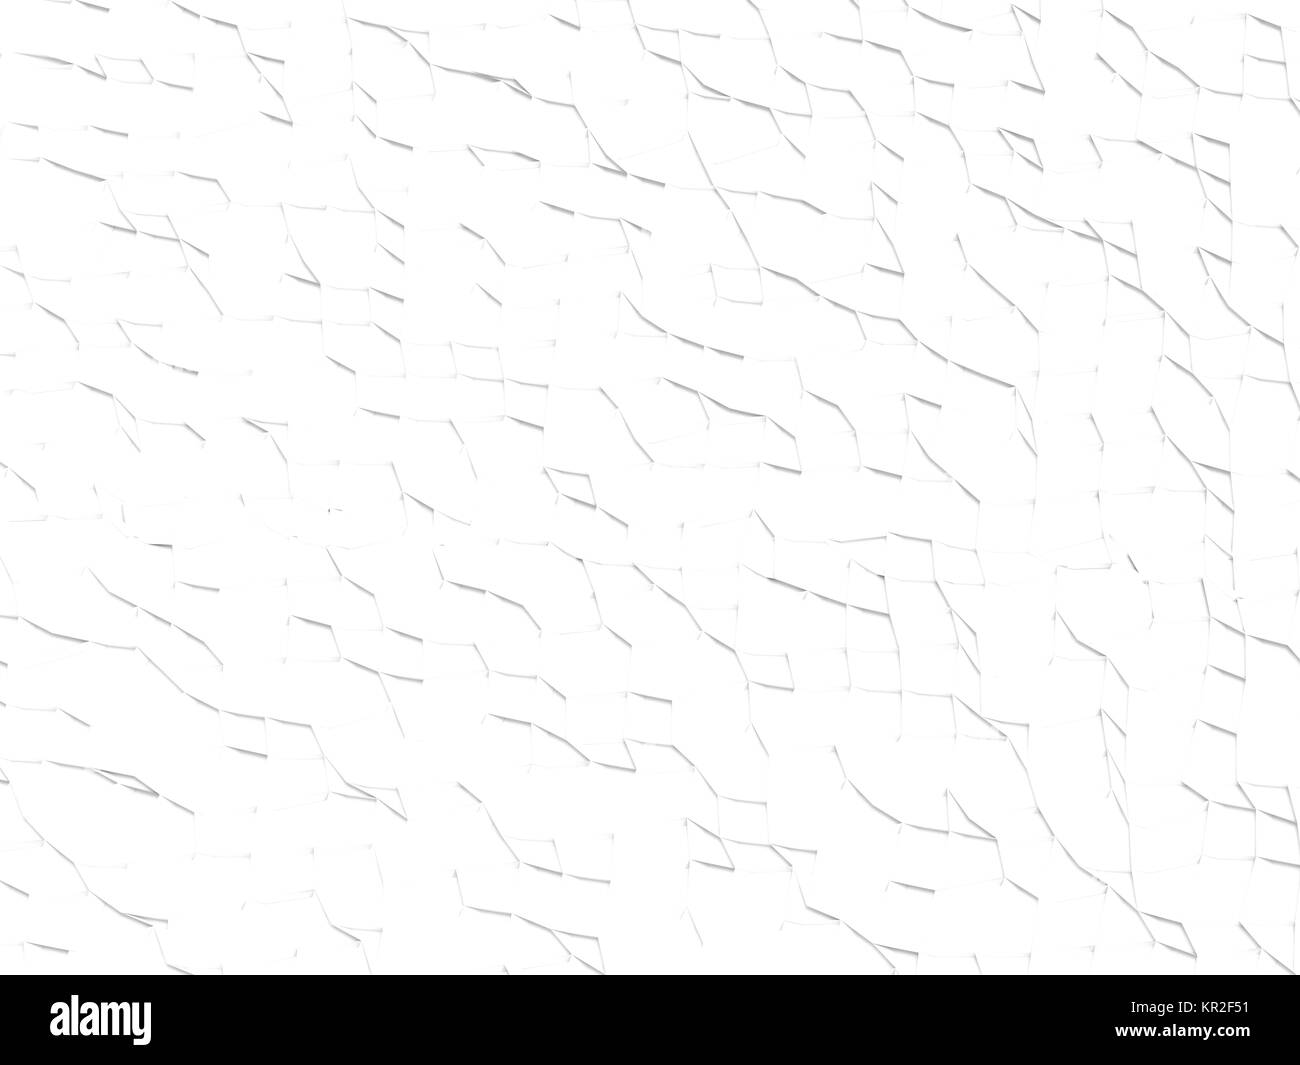 3d redndering scratch wall texture isolated with white Stock Photo